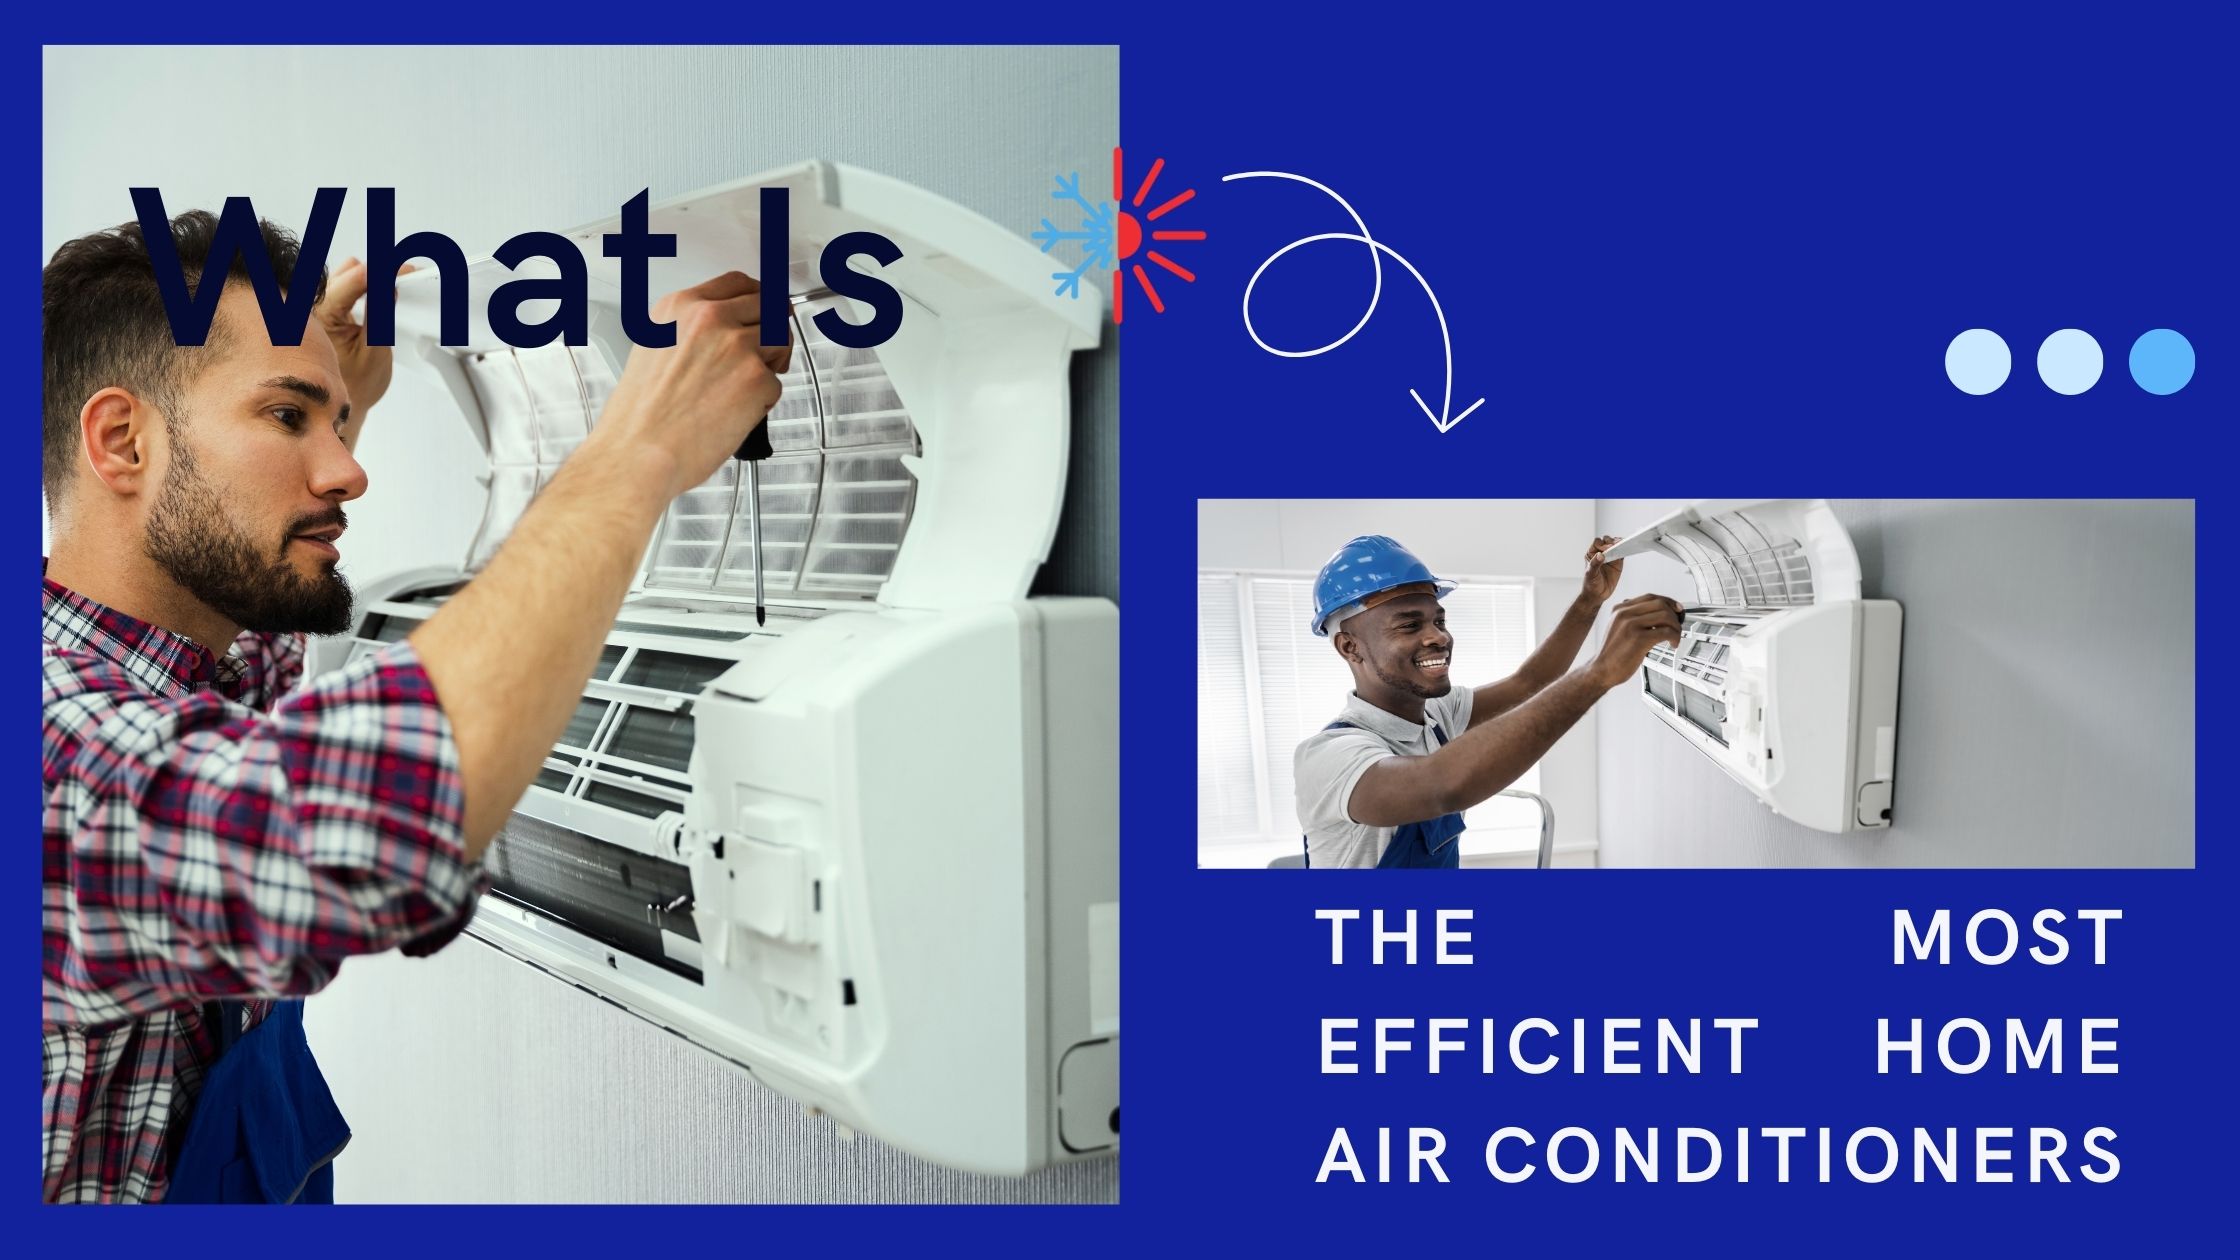 What Is The Most Efficient Home Ac?